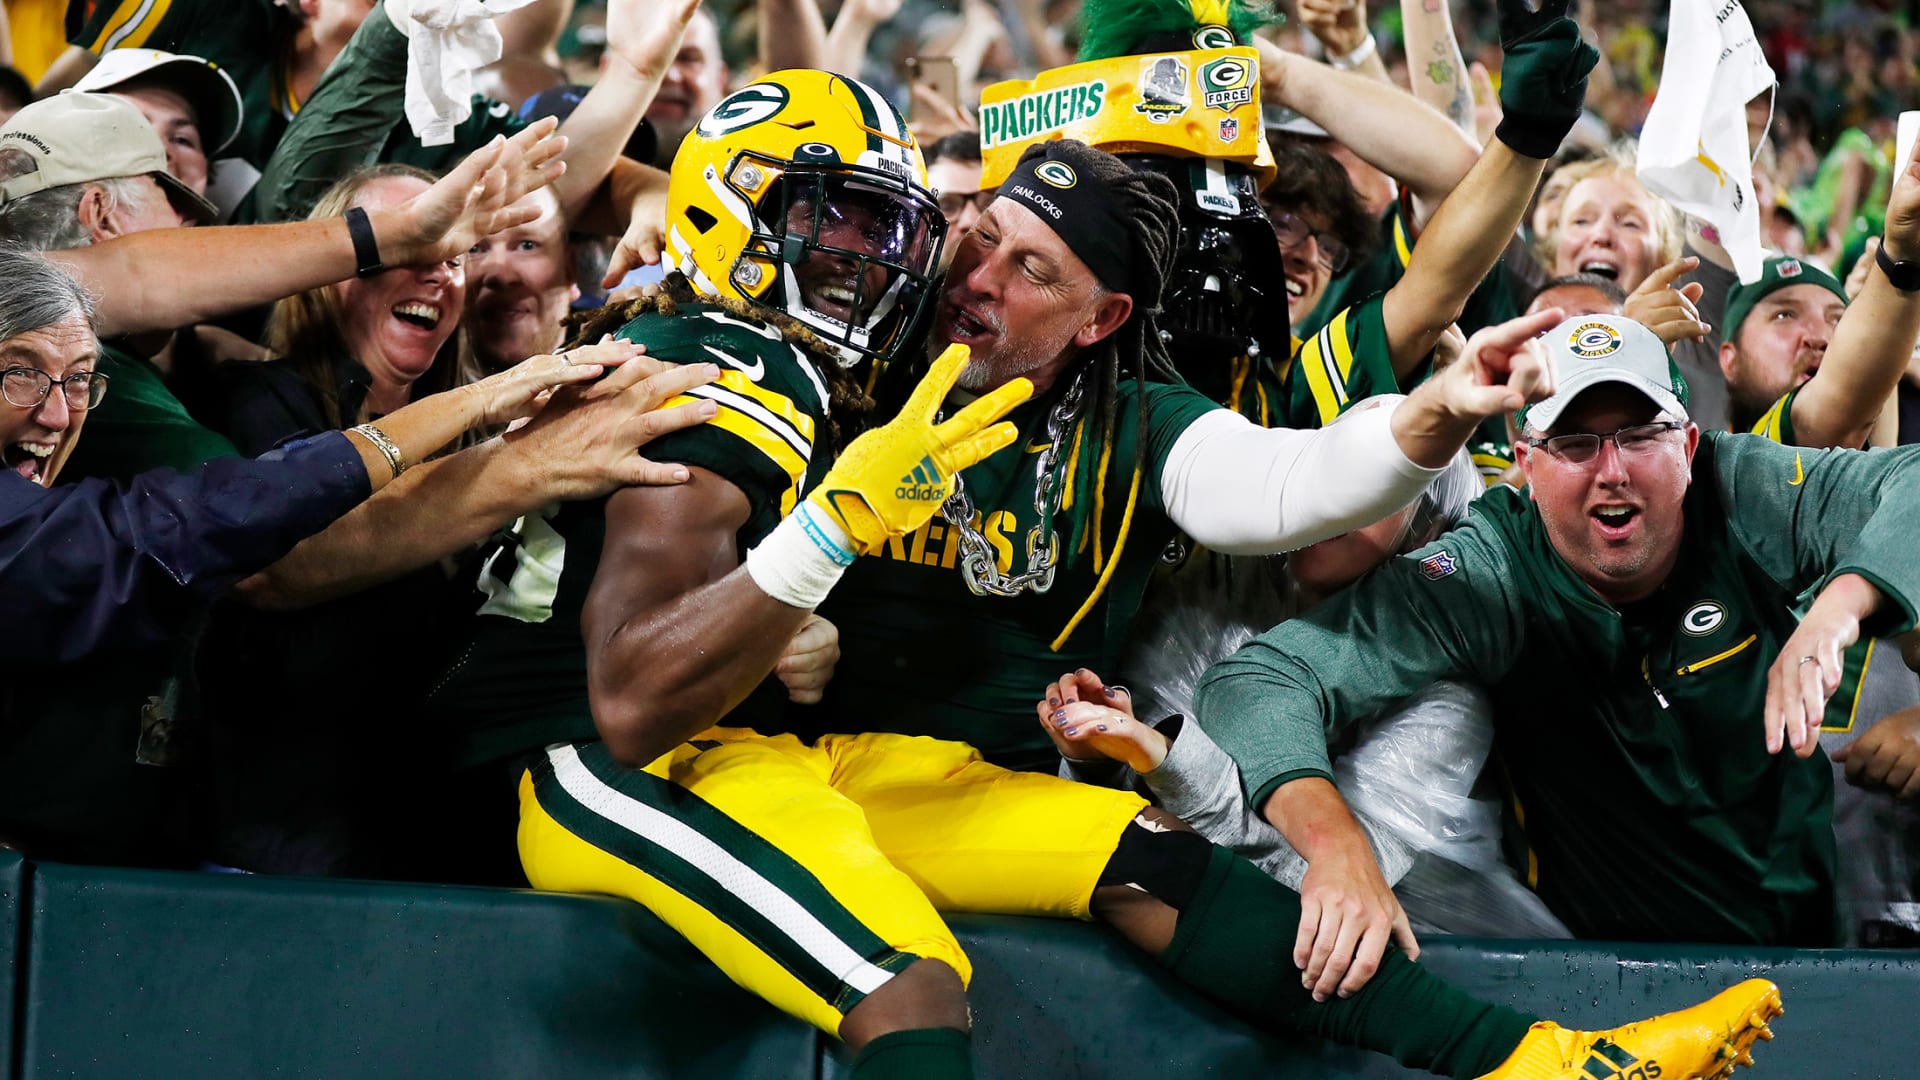 What the Packers' $90 Million Stock Sale Says About the Nature of Customer Loyalty